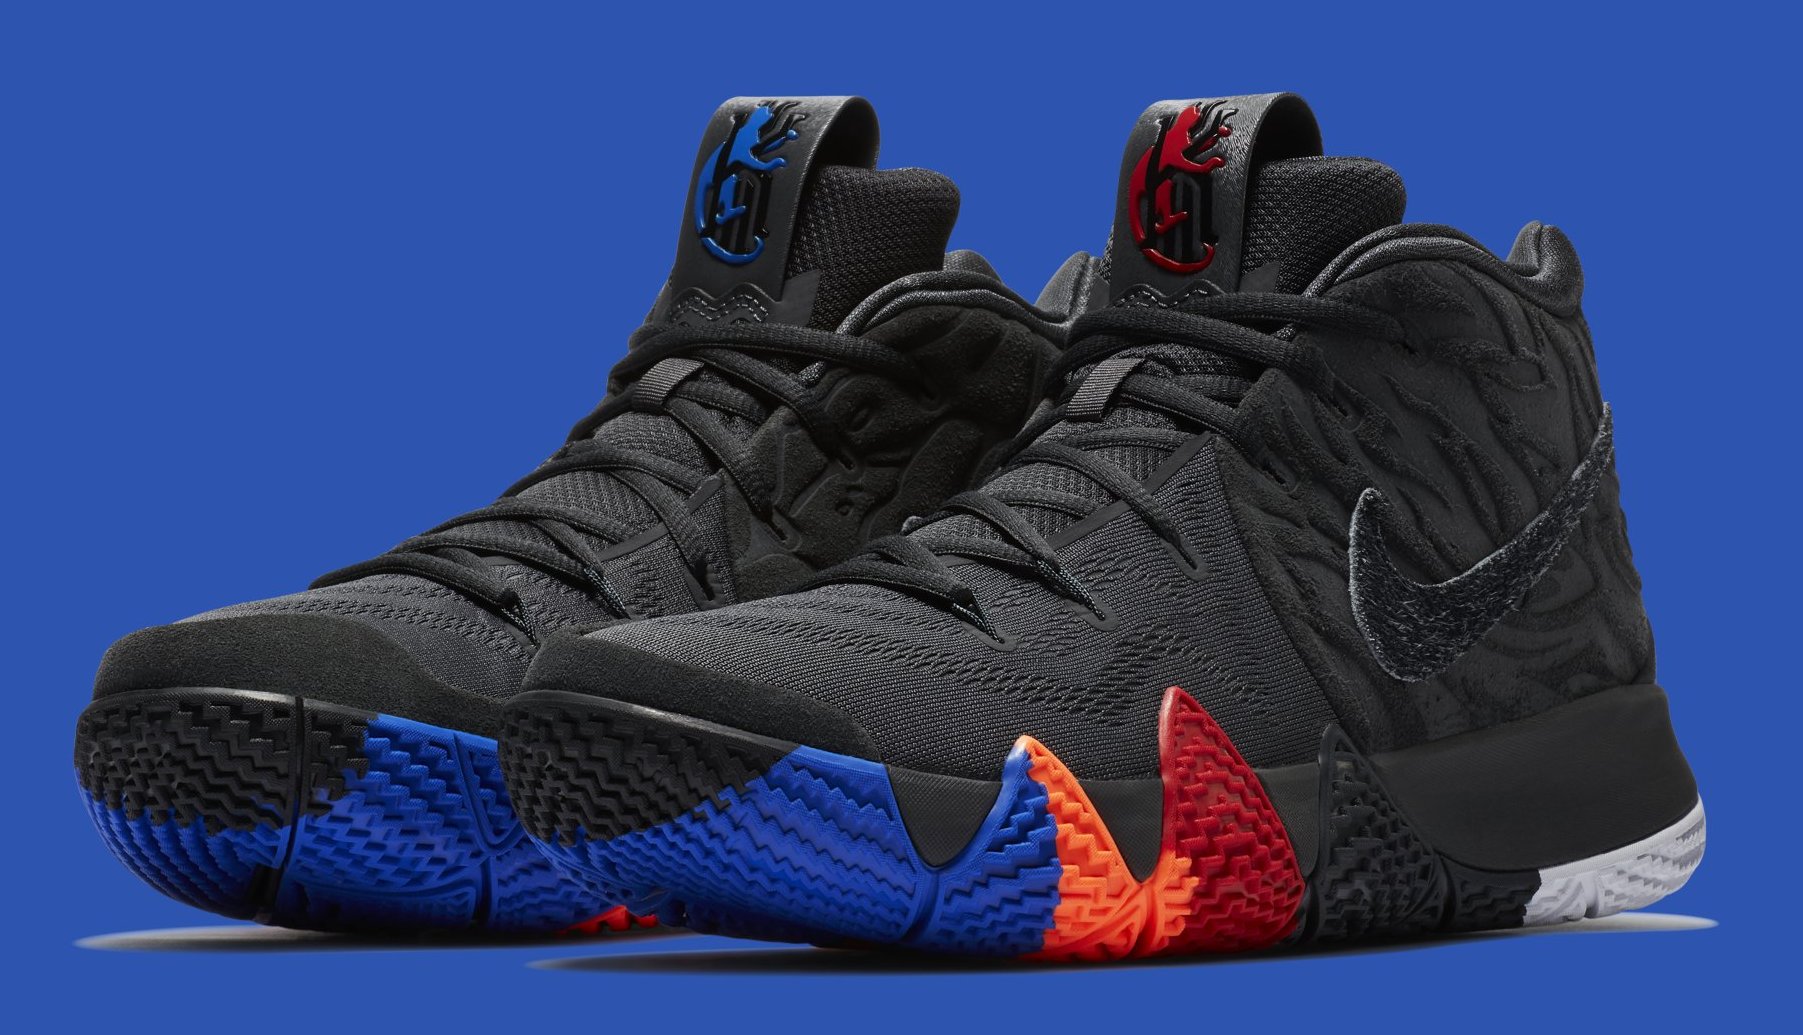 Juicio compilar escritura Nike Kyrie 4 'Year of the Monkey' 943807-011 Release Date | Sole Collector